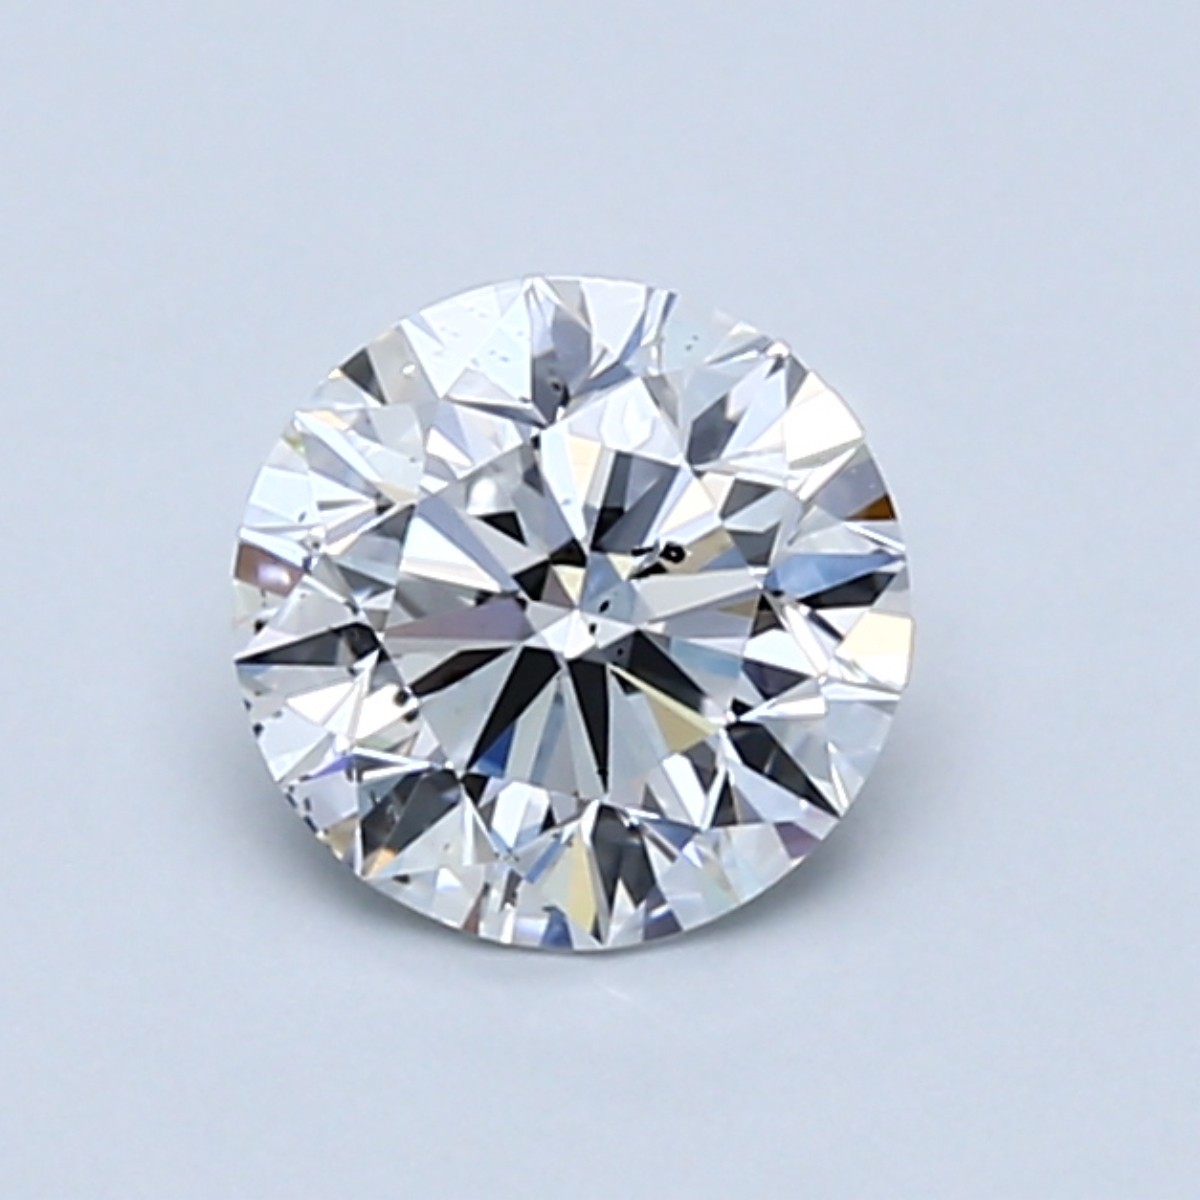 Round 0.9 Carat D Color SI1 Clarity For Sale